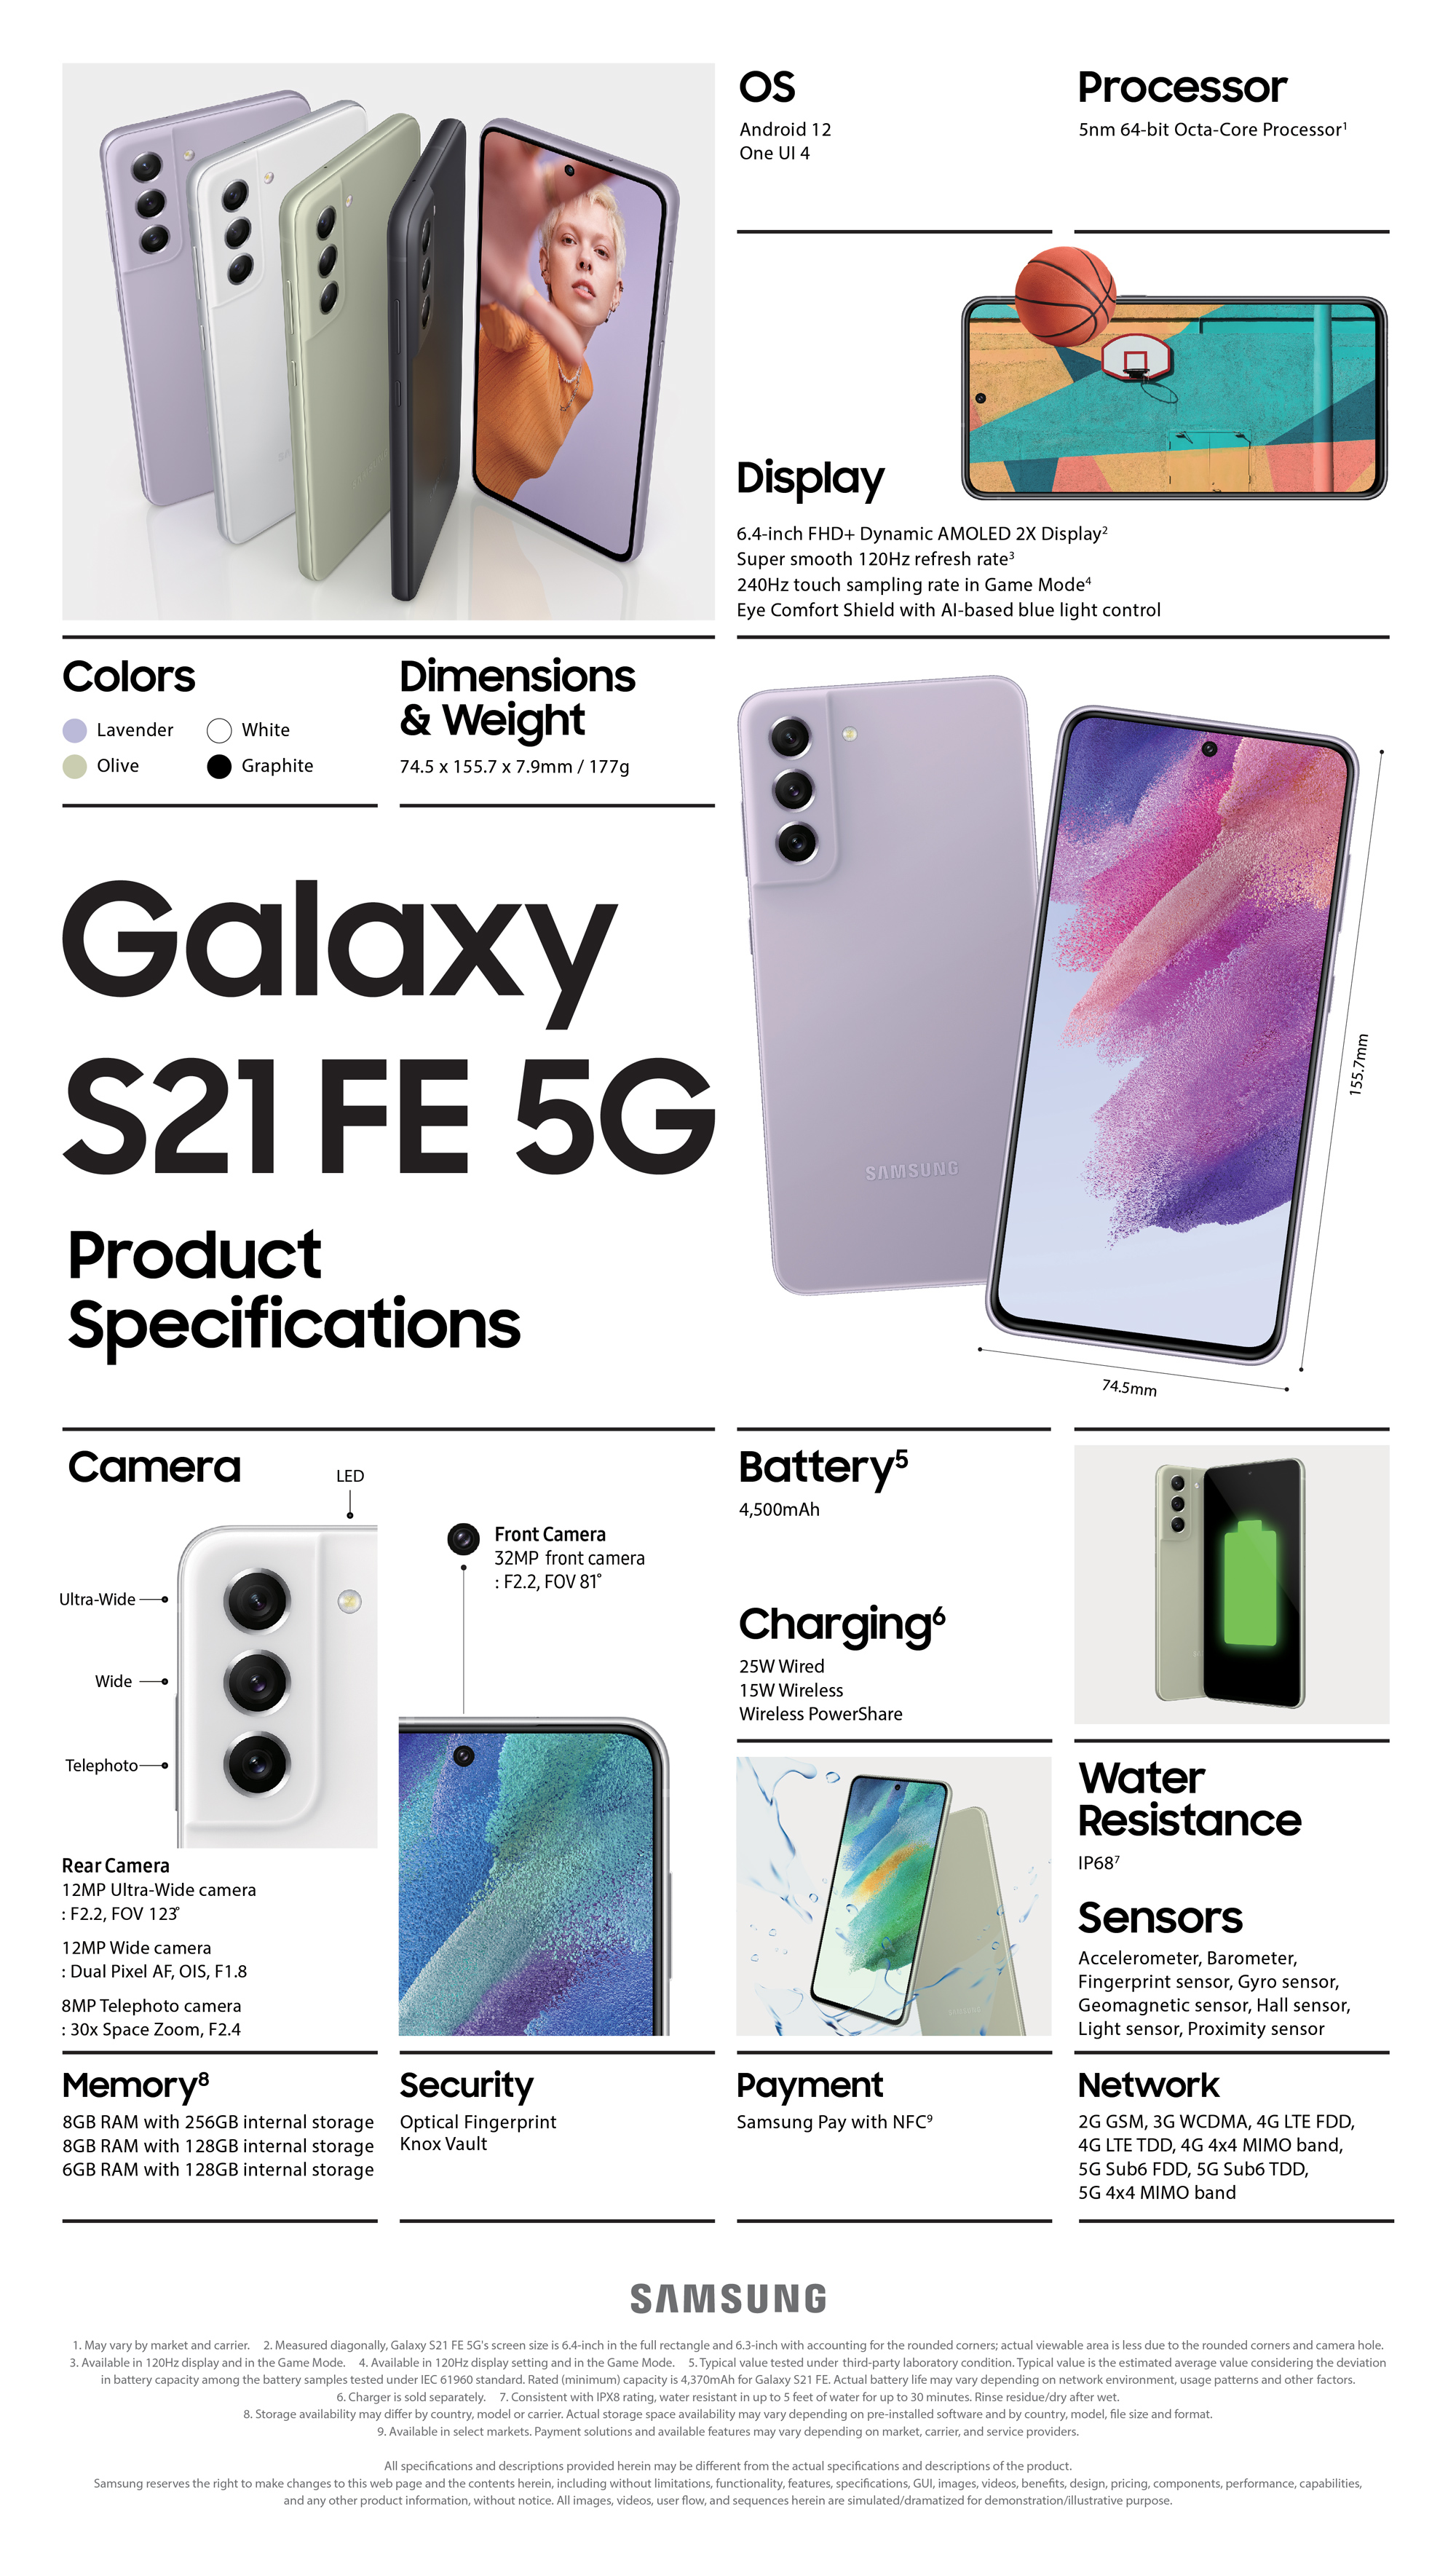 Spec Infographic of Galaxy S21 FE 5G